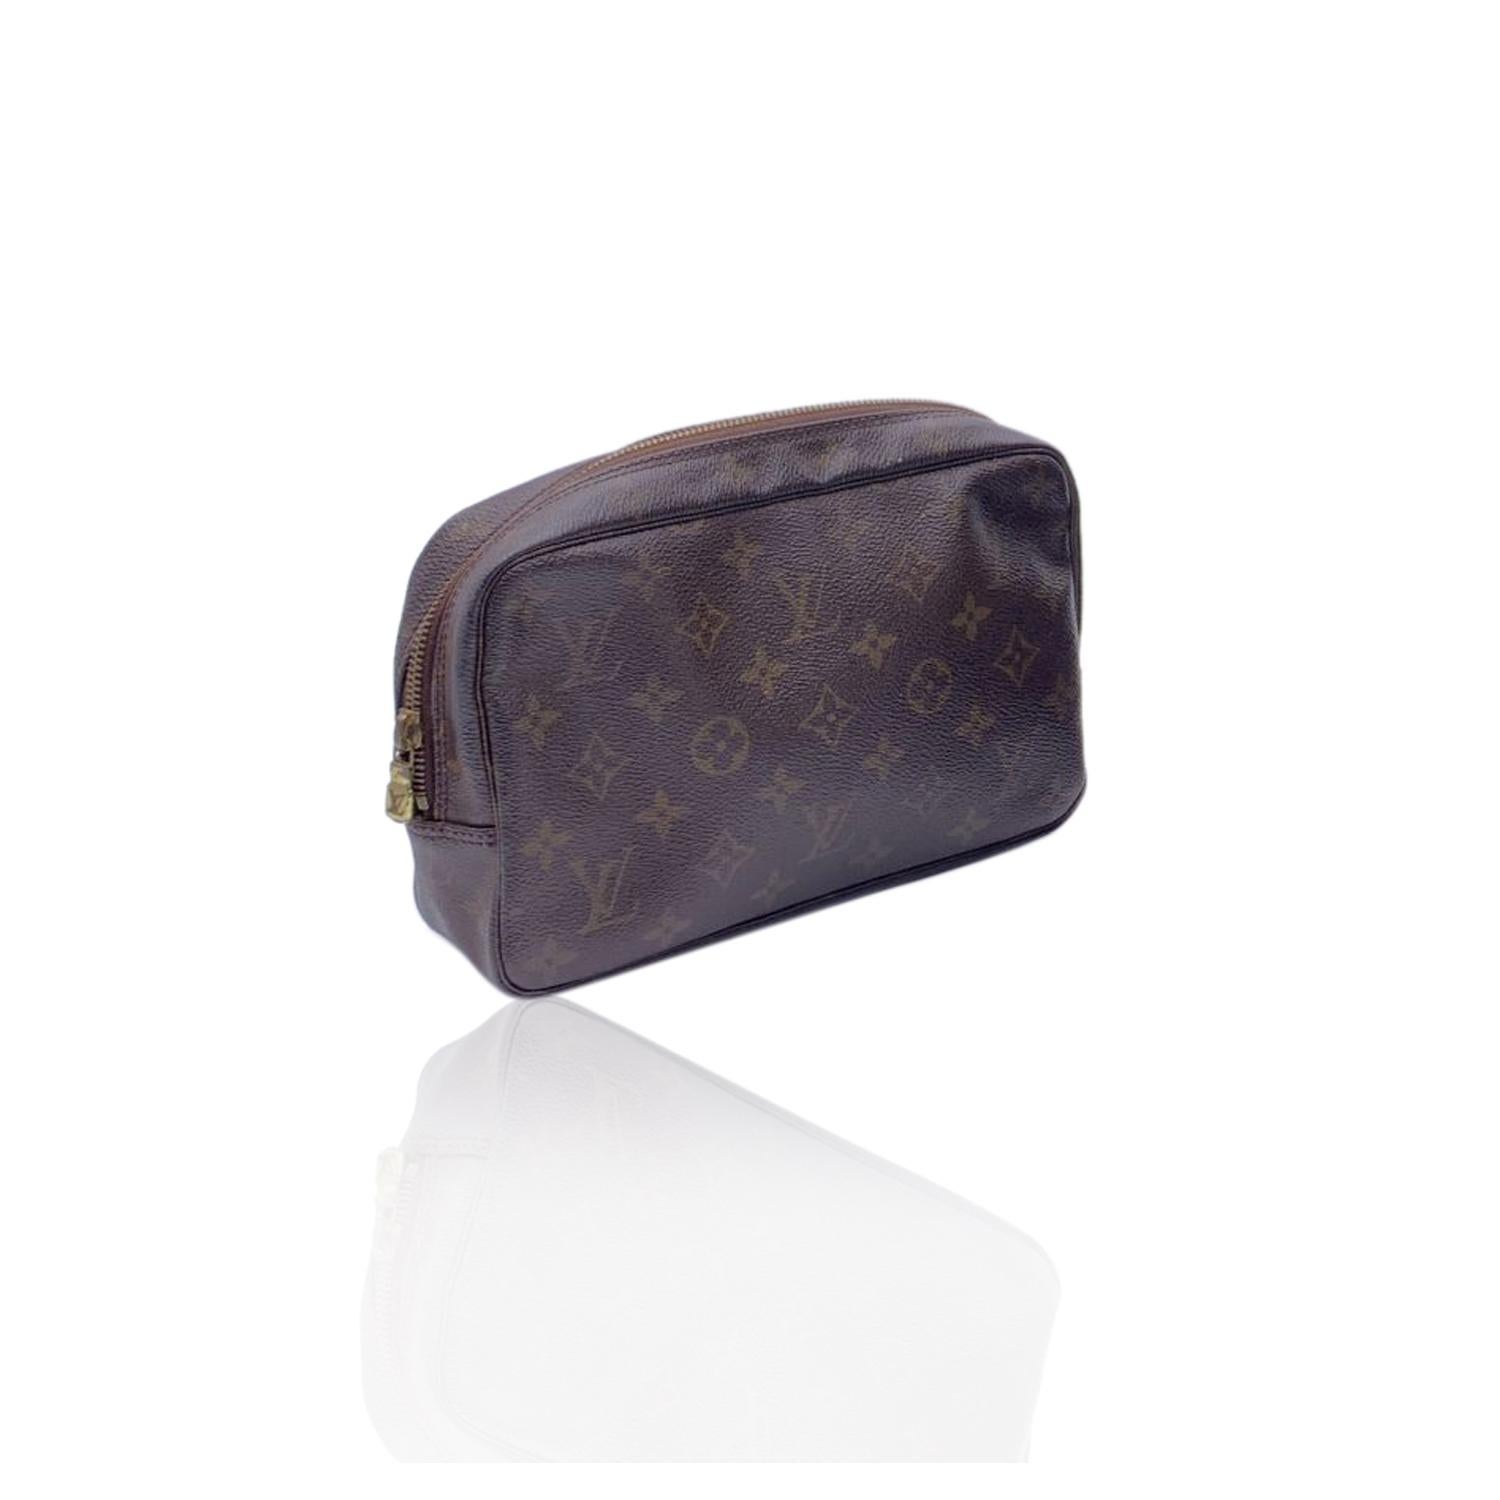 LOUIS VUITTON Monogram trousse Toiletry 23 cosmetic bag. Brown monogram coated canvas. Brass hardware. Upper zipper closure Beige lining. 1 side open pocket inside and elasticated straps to hold bottle and cosmetics. 'LOUIS VUITTON Paris - Made in